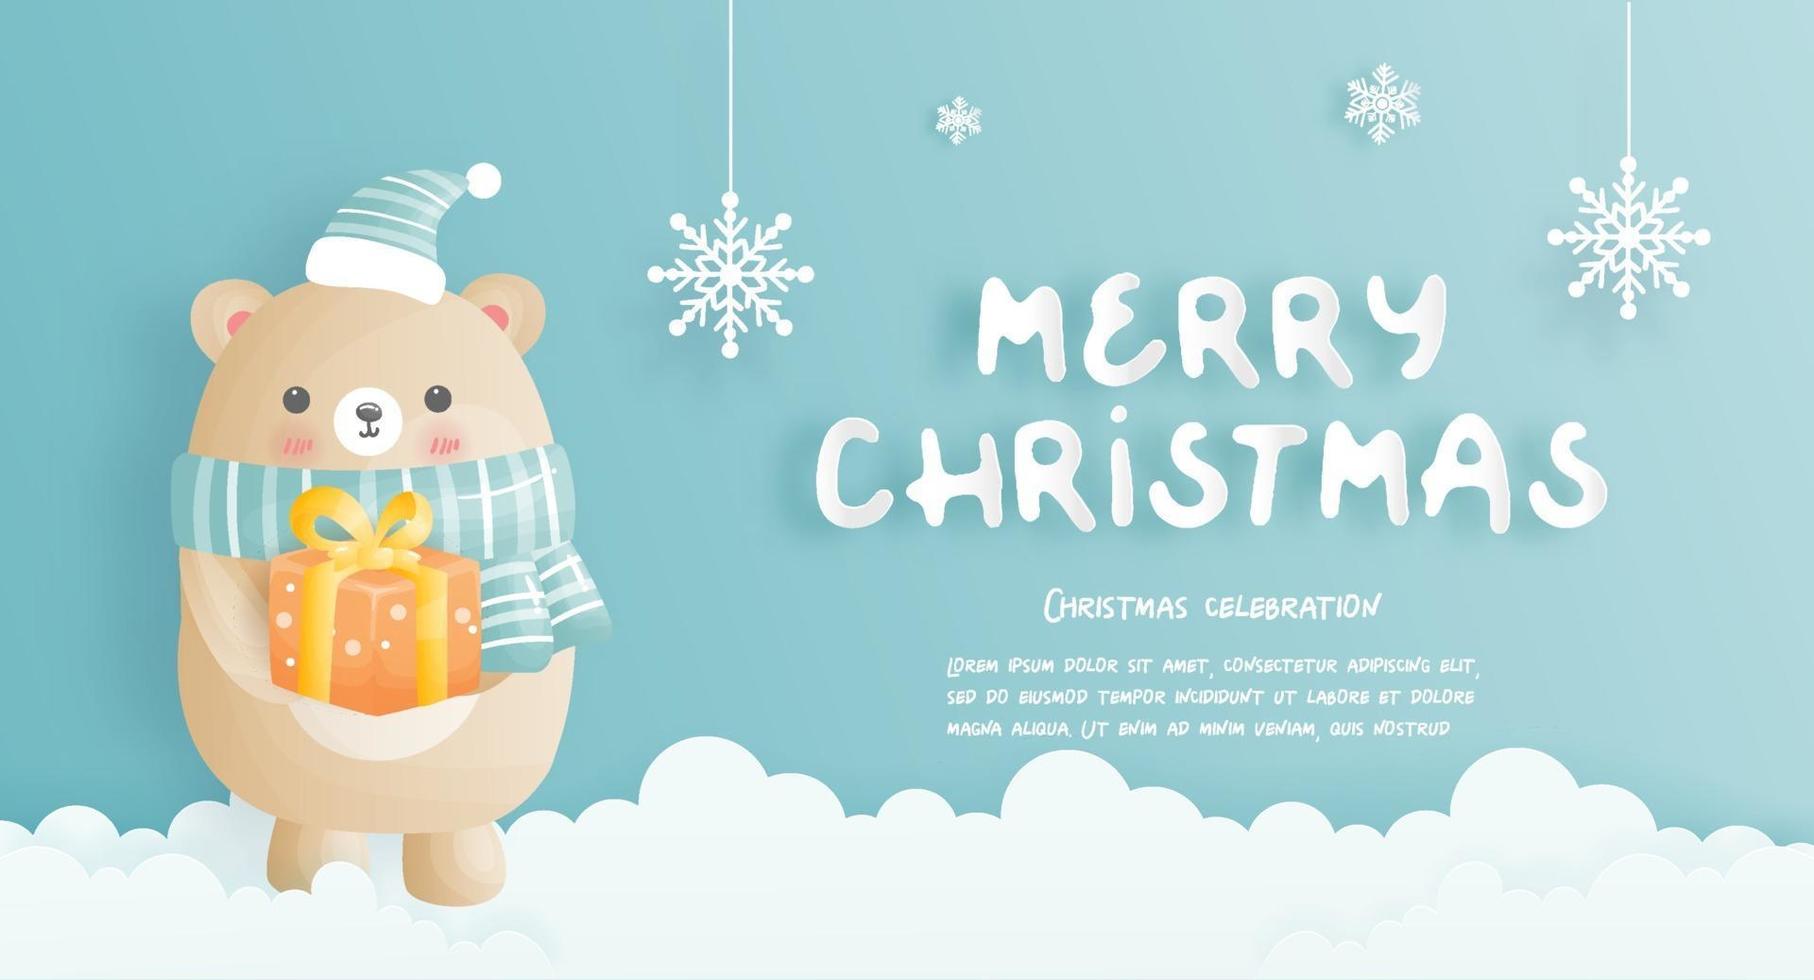 Christmas card, celebrations with cute bear holding a gift box vector